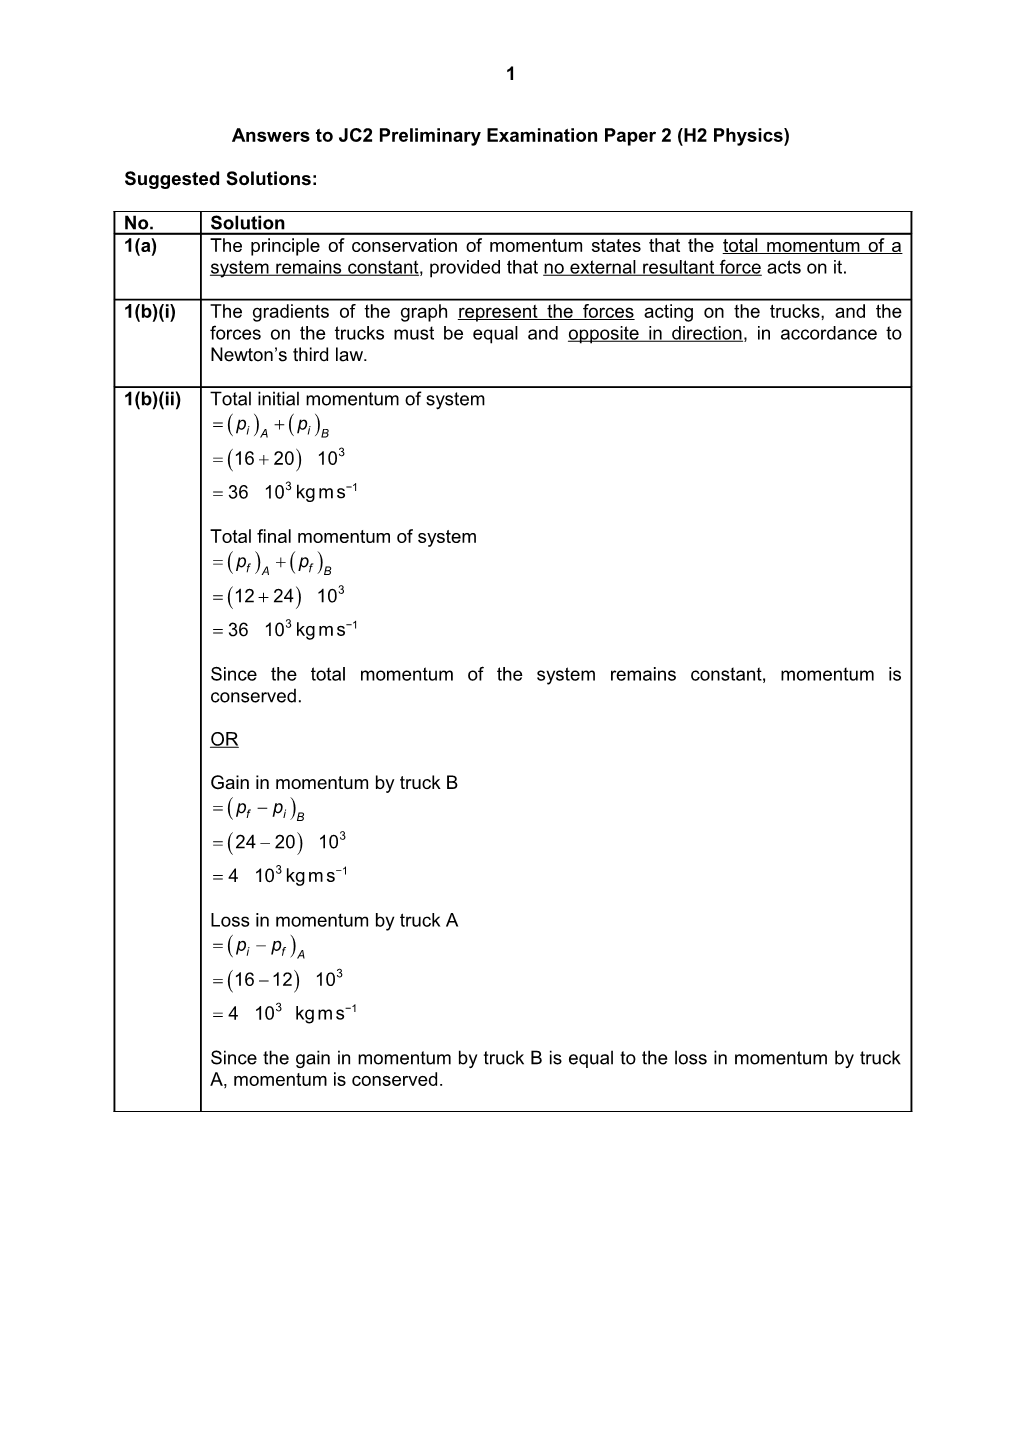 Answers to JC2 Preliminary Examination Paper 2 (H2 Physics)